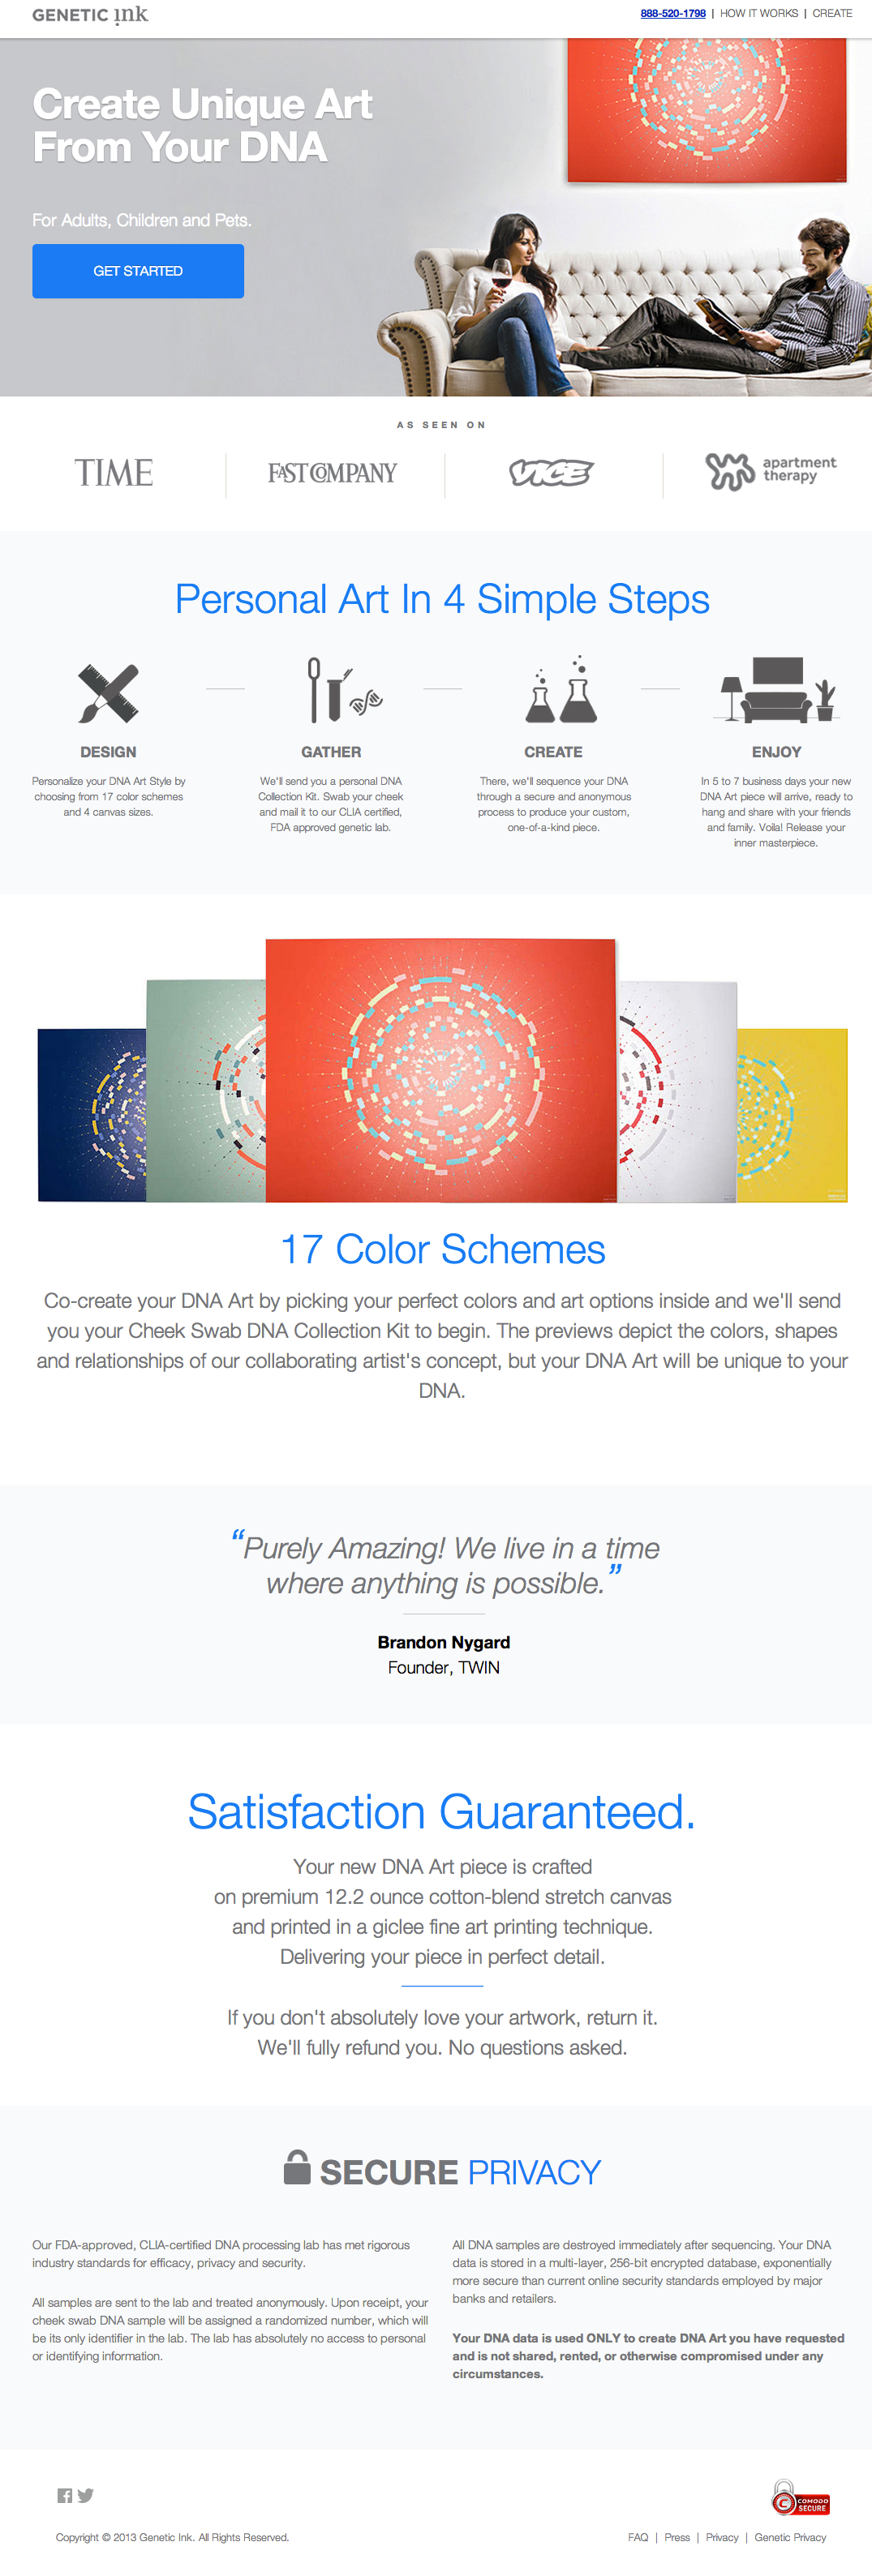 Genetic Ink doesn't just create DNA Art, but a beautiful experience for its customers.